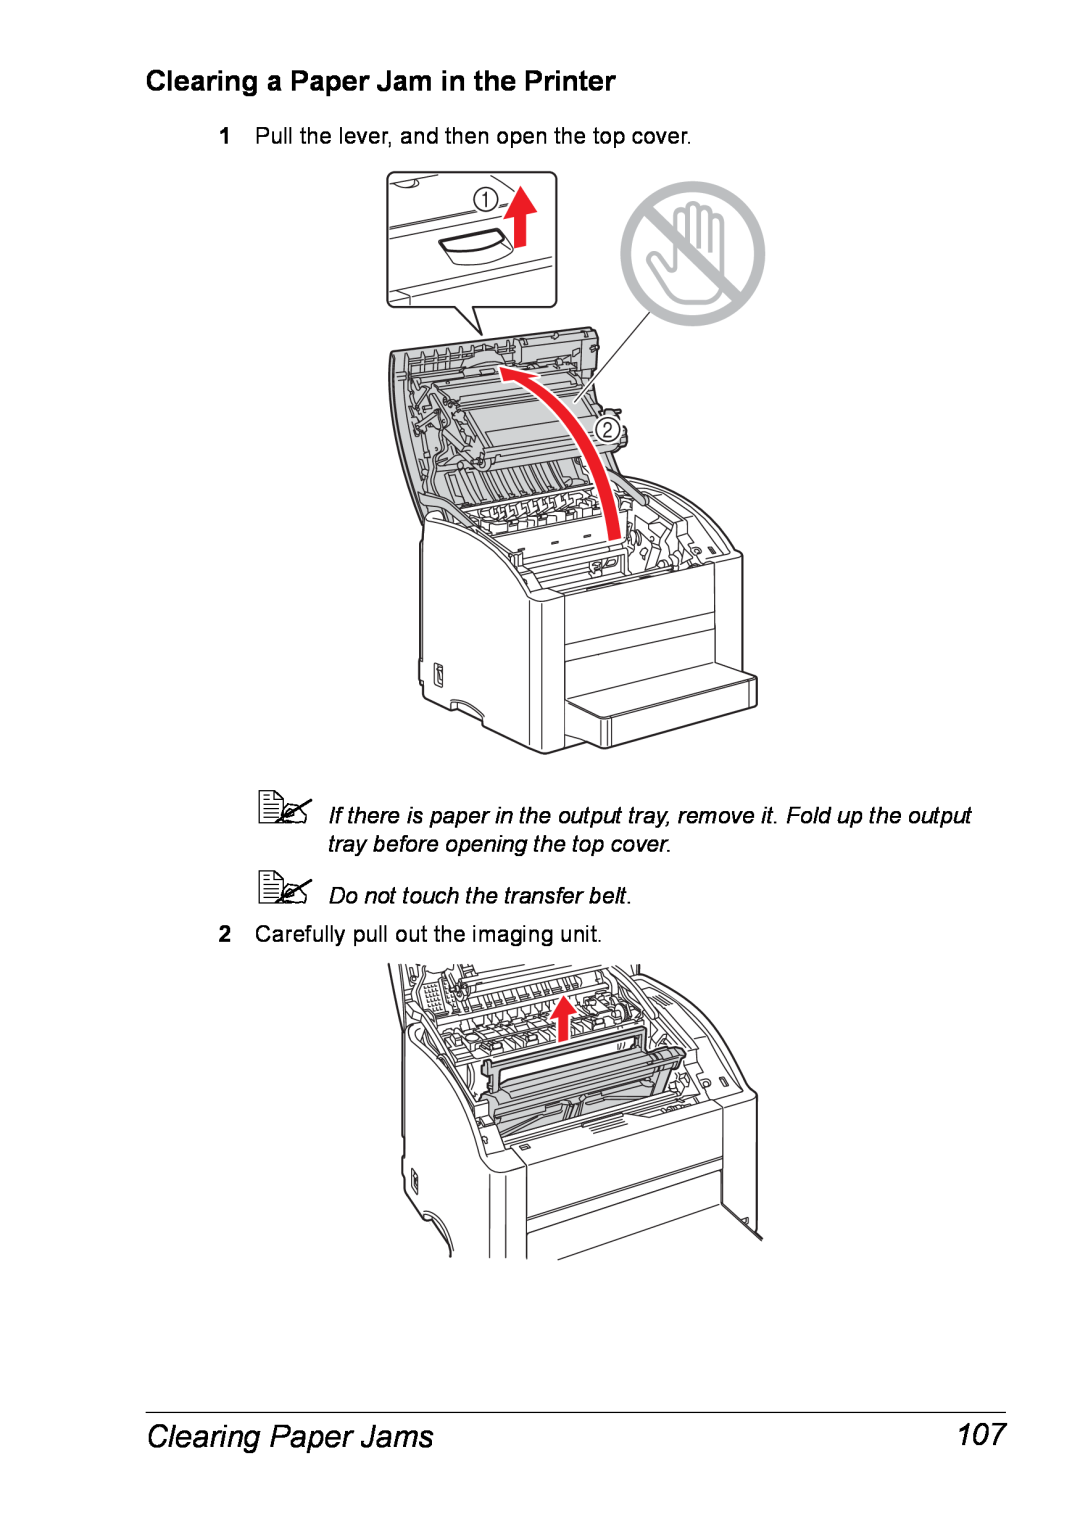 Xerox 6120 manual Clearing a Paper Jam in the Printer, Clearing Paper Jams,  Do not touch the transfer belt 